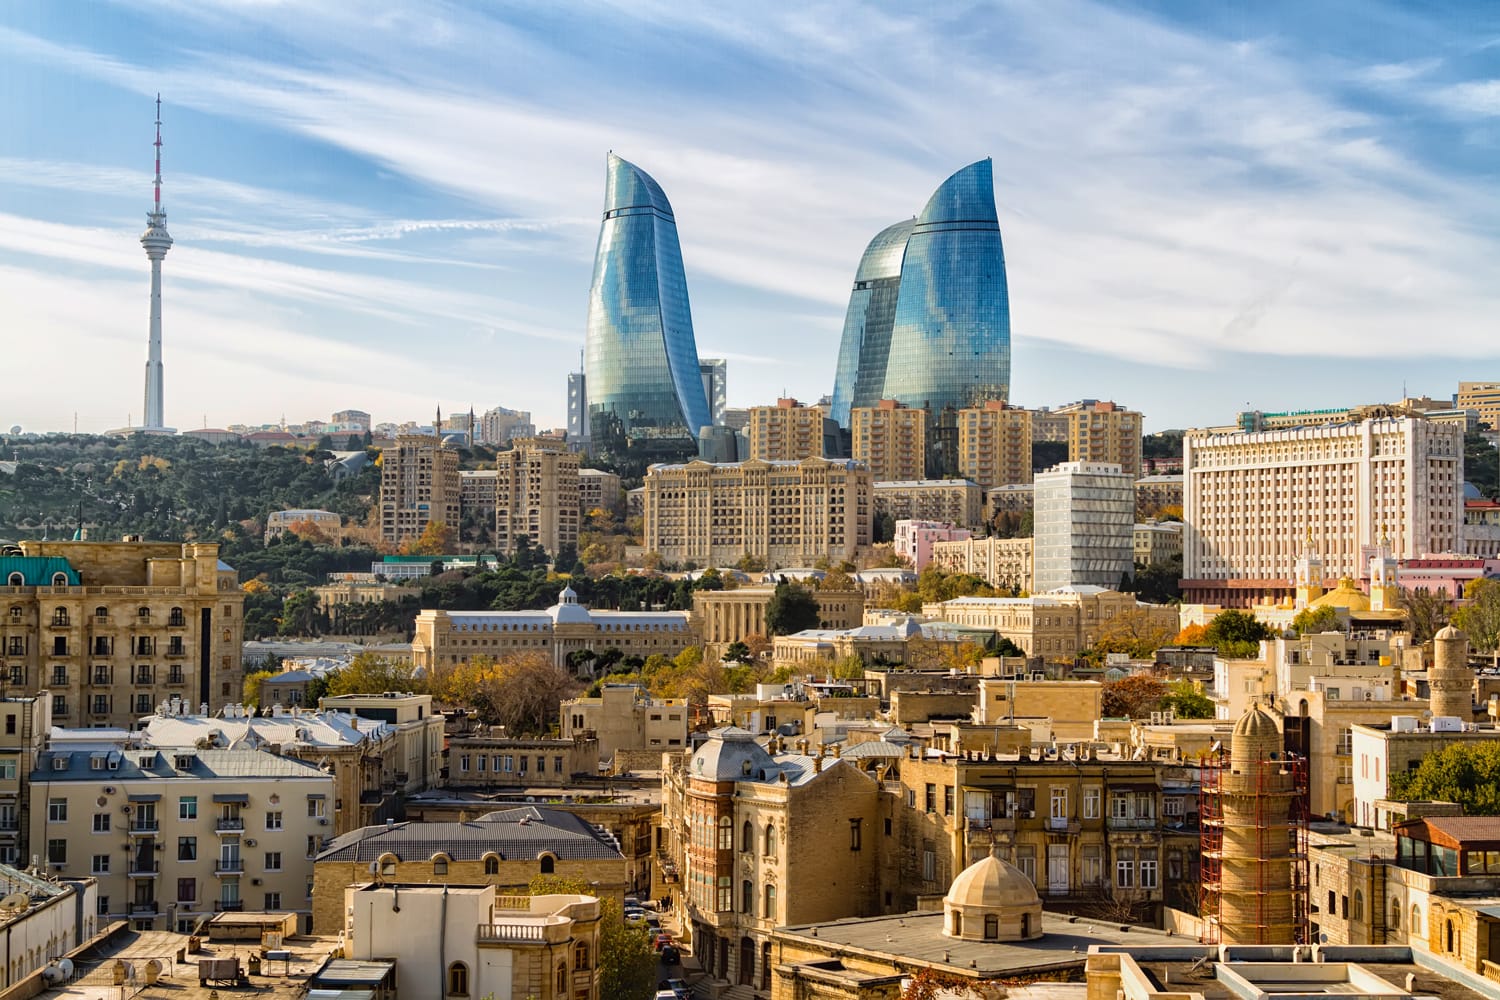 Panoramic view of Baku - the capital of Azerbaijan located by the Caspian See shore.